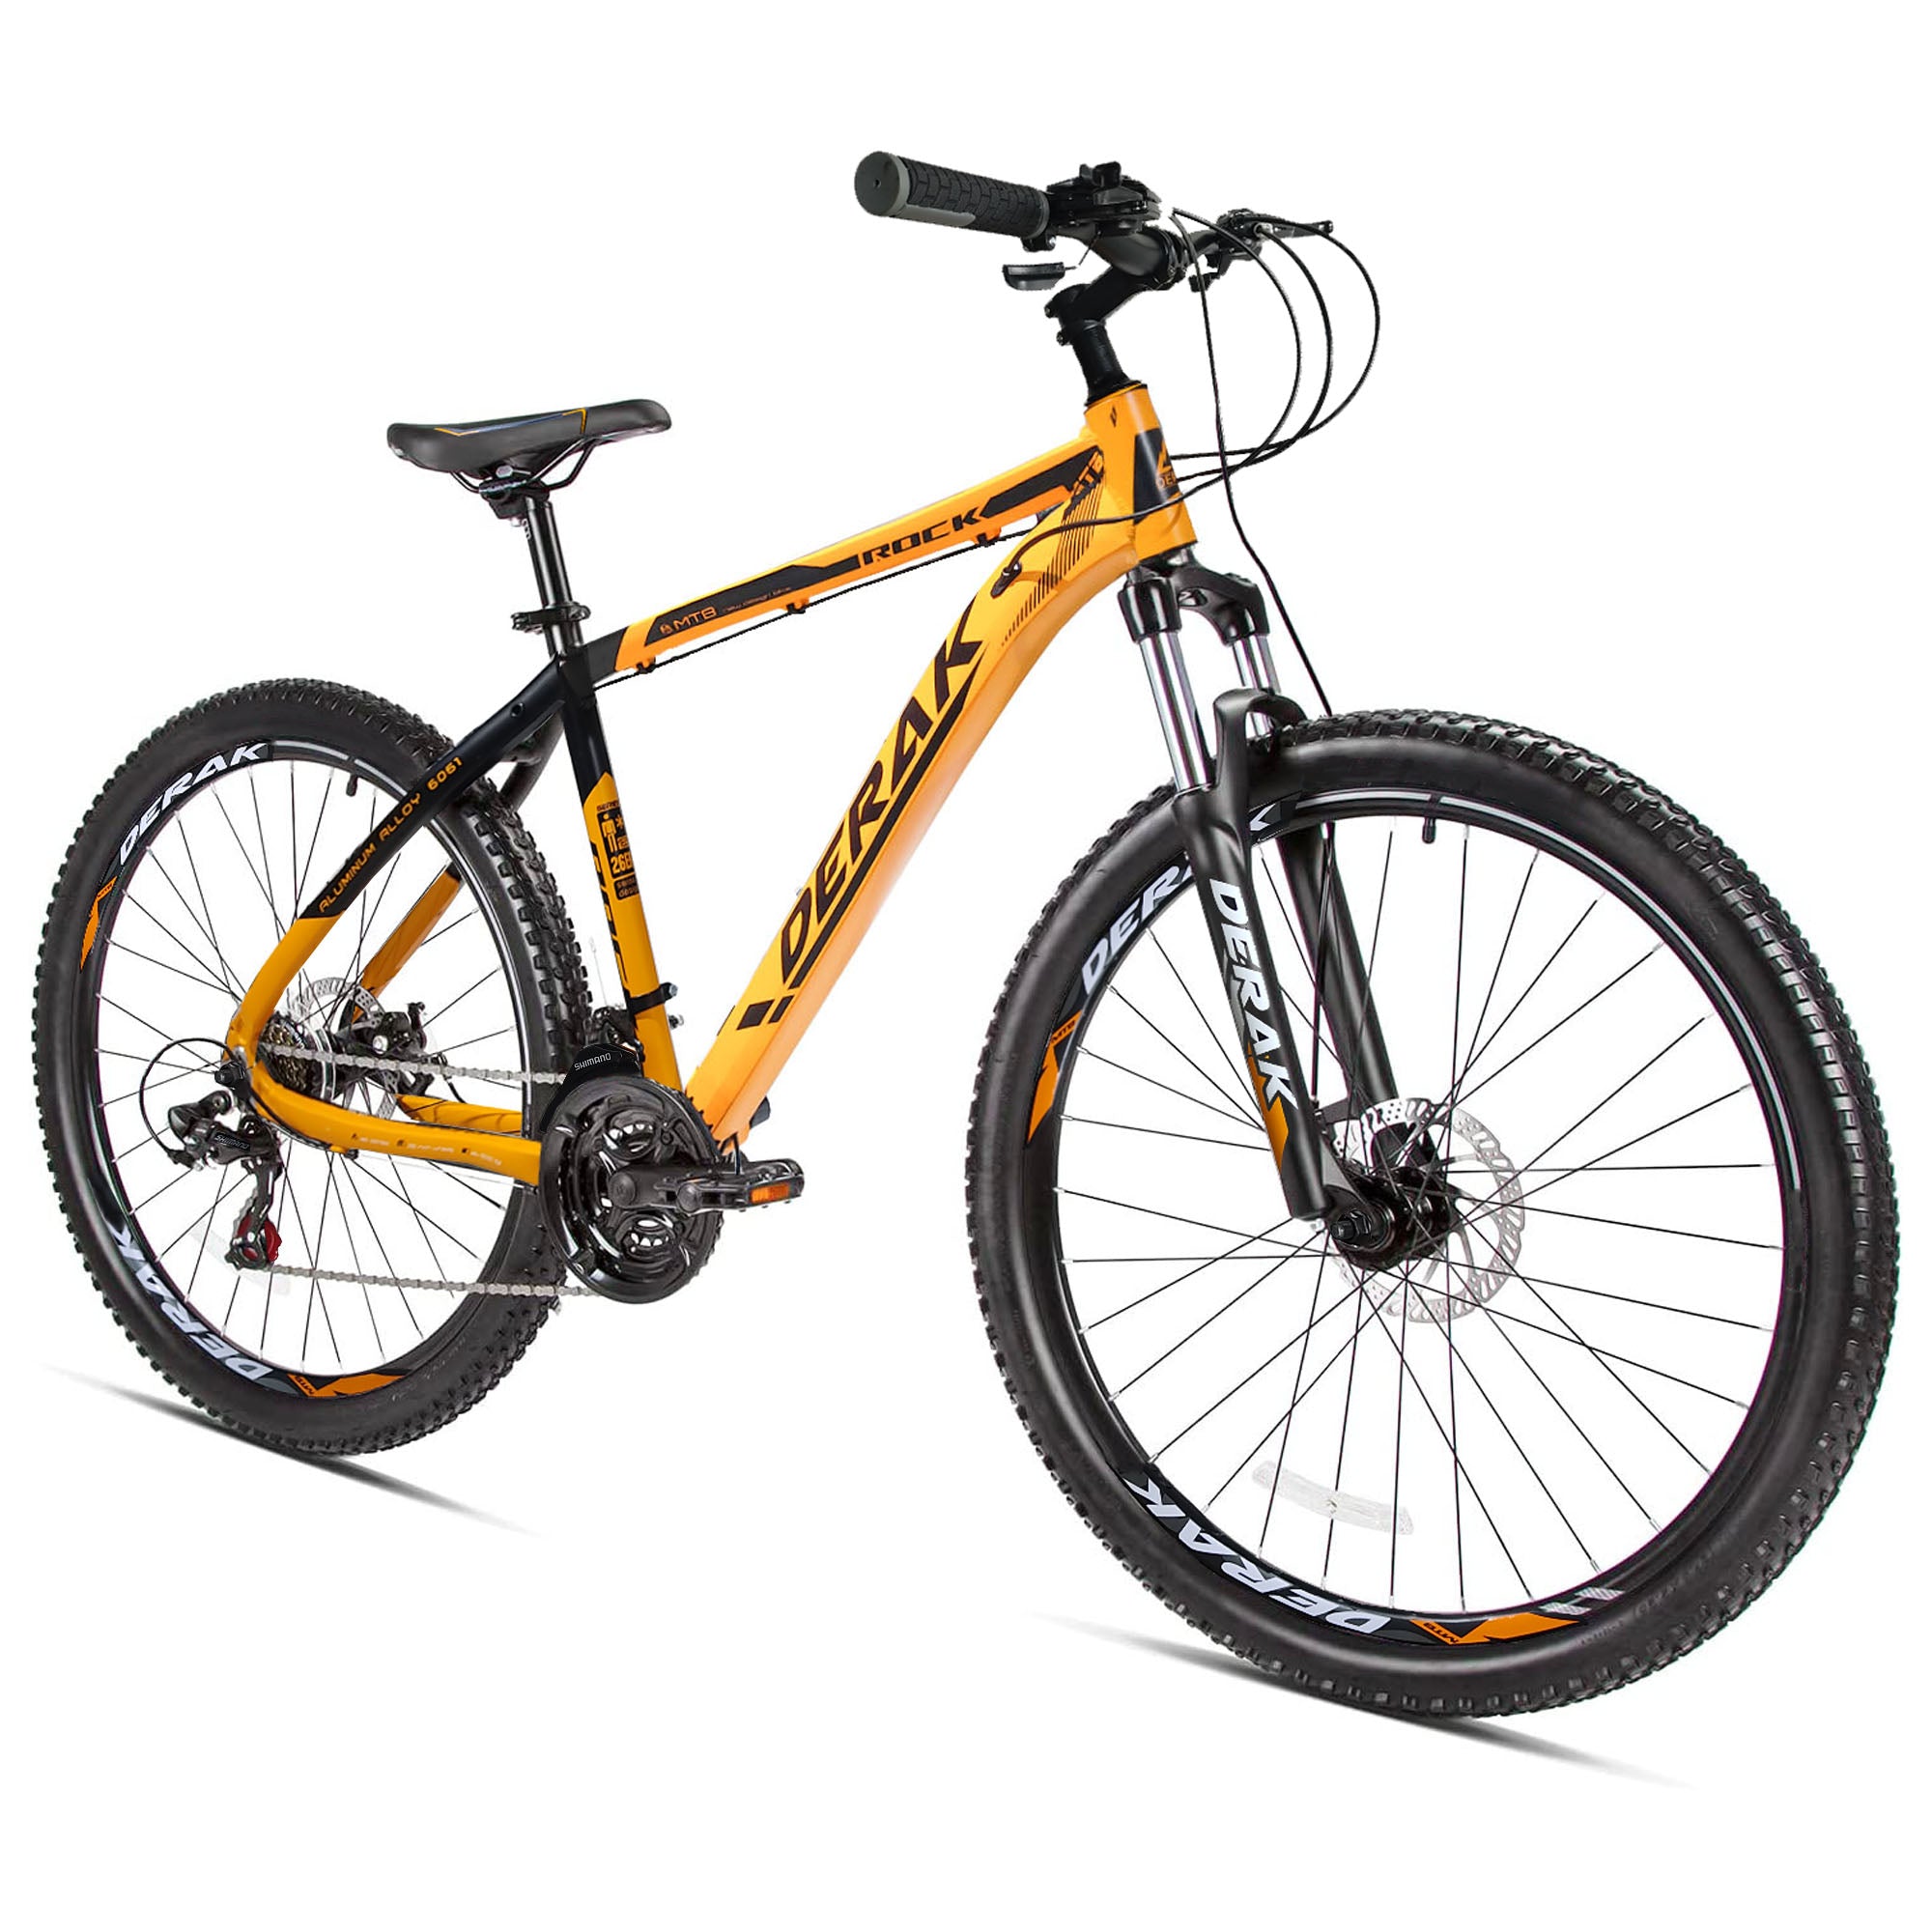 Rock Aluminum Bicycle Adults 26 Inch Yellow (100% Assembled)